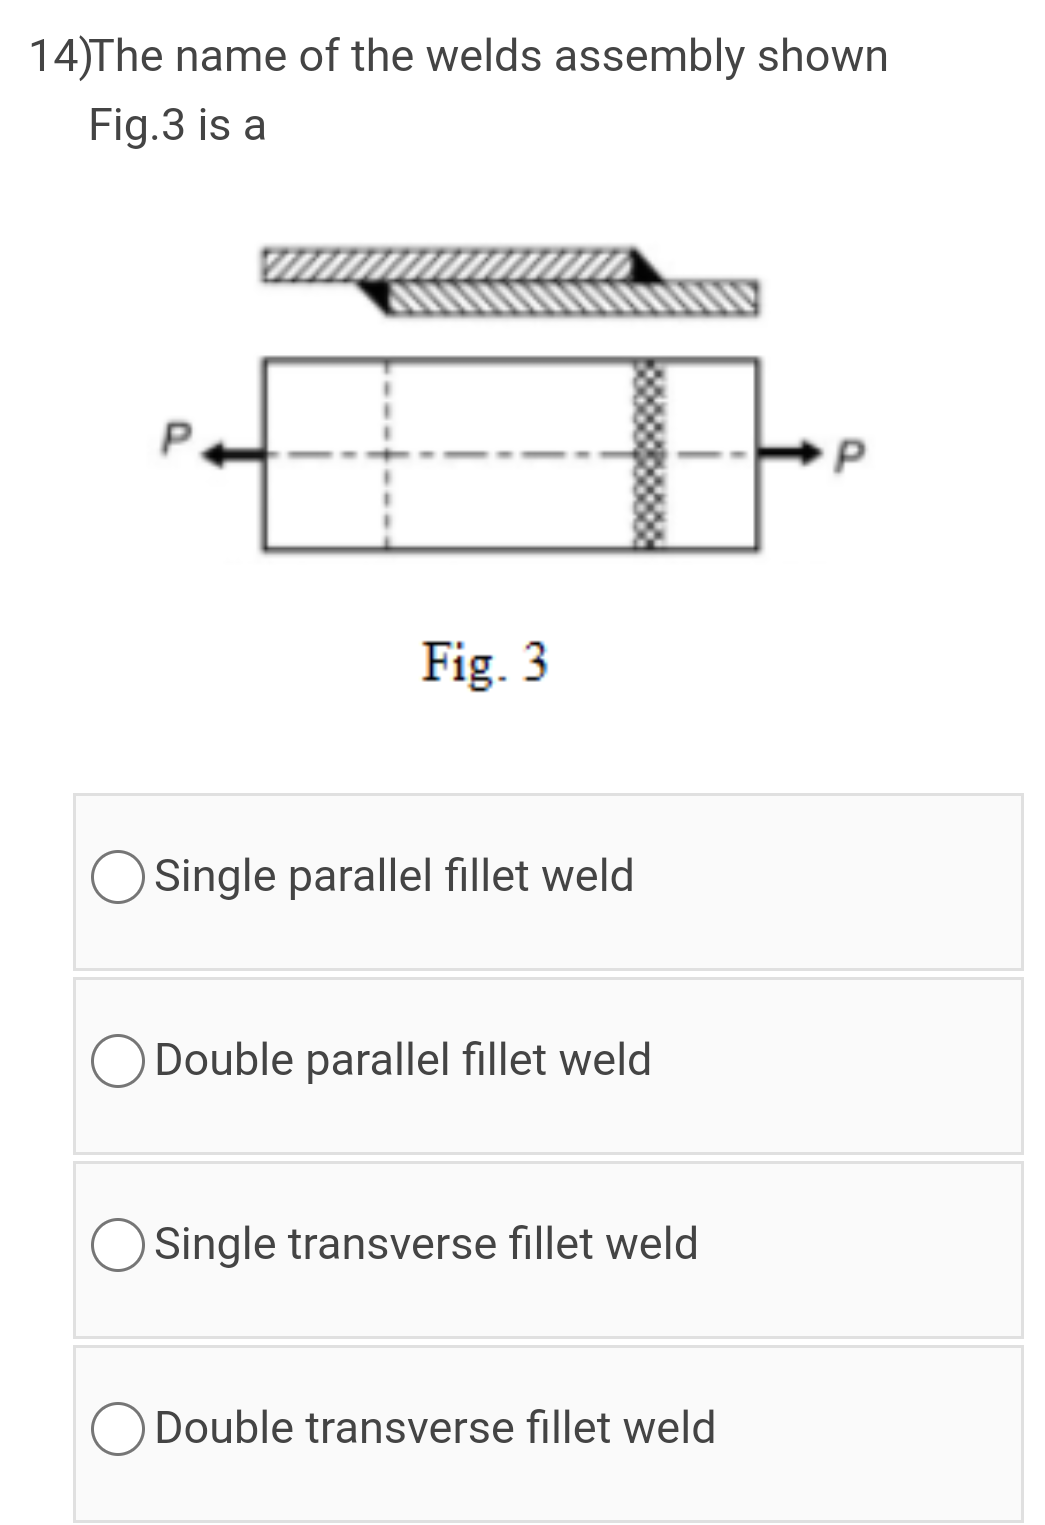 14)The name of the welds assembly shown
Fig.3 is a
P.
Fig. 3
Single parallel fillet weld
O Double parallel fillet weld
Single transverse fillet weld
ODouble transverse fillet weld
